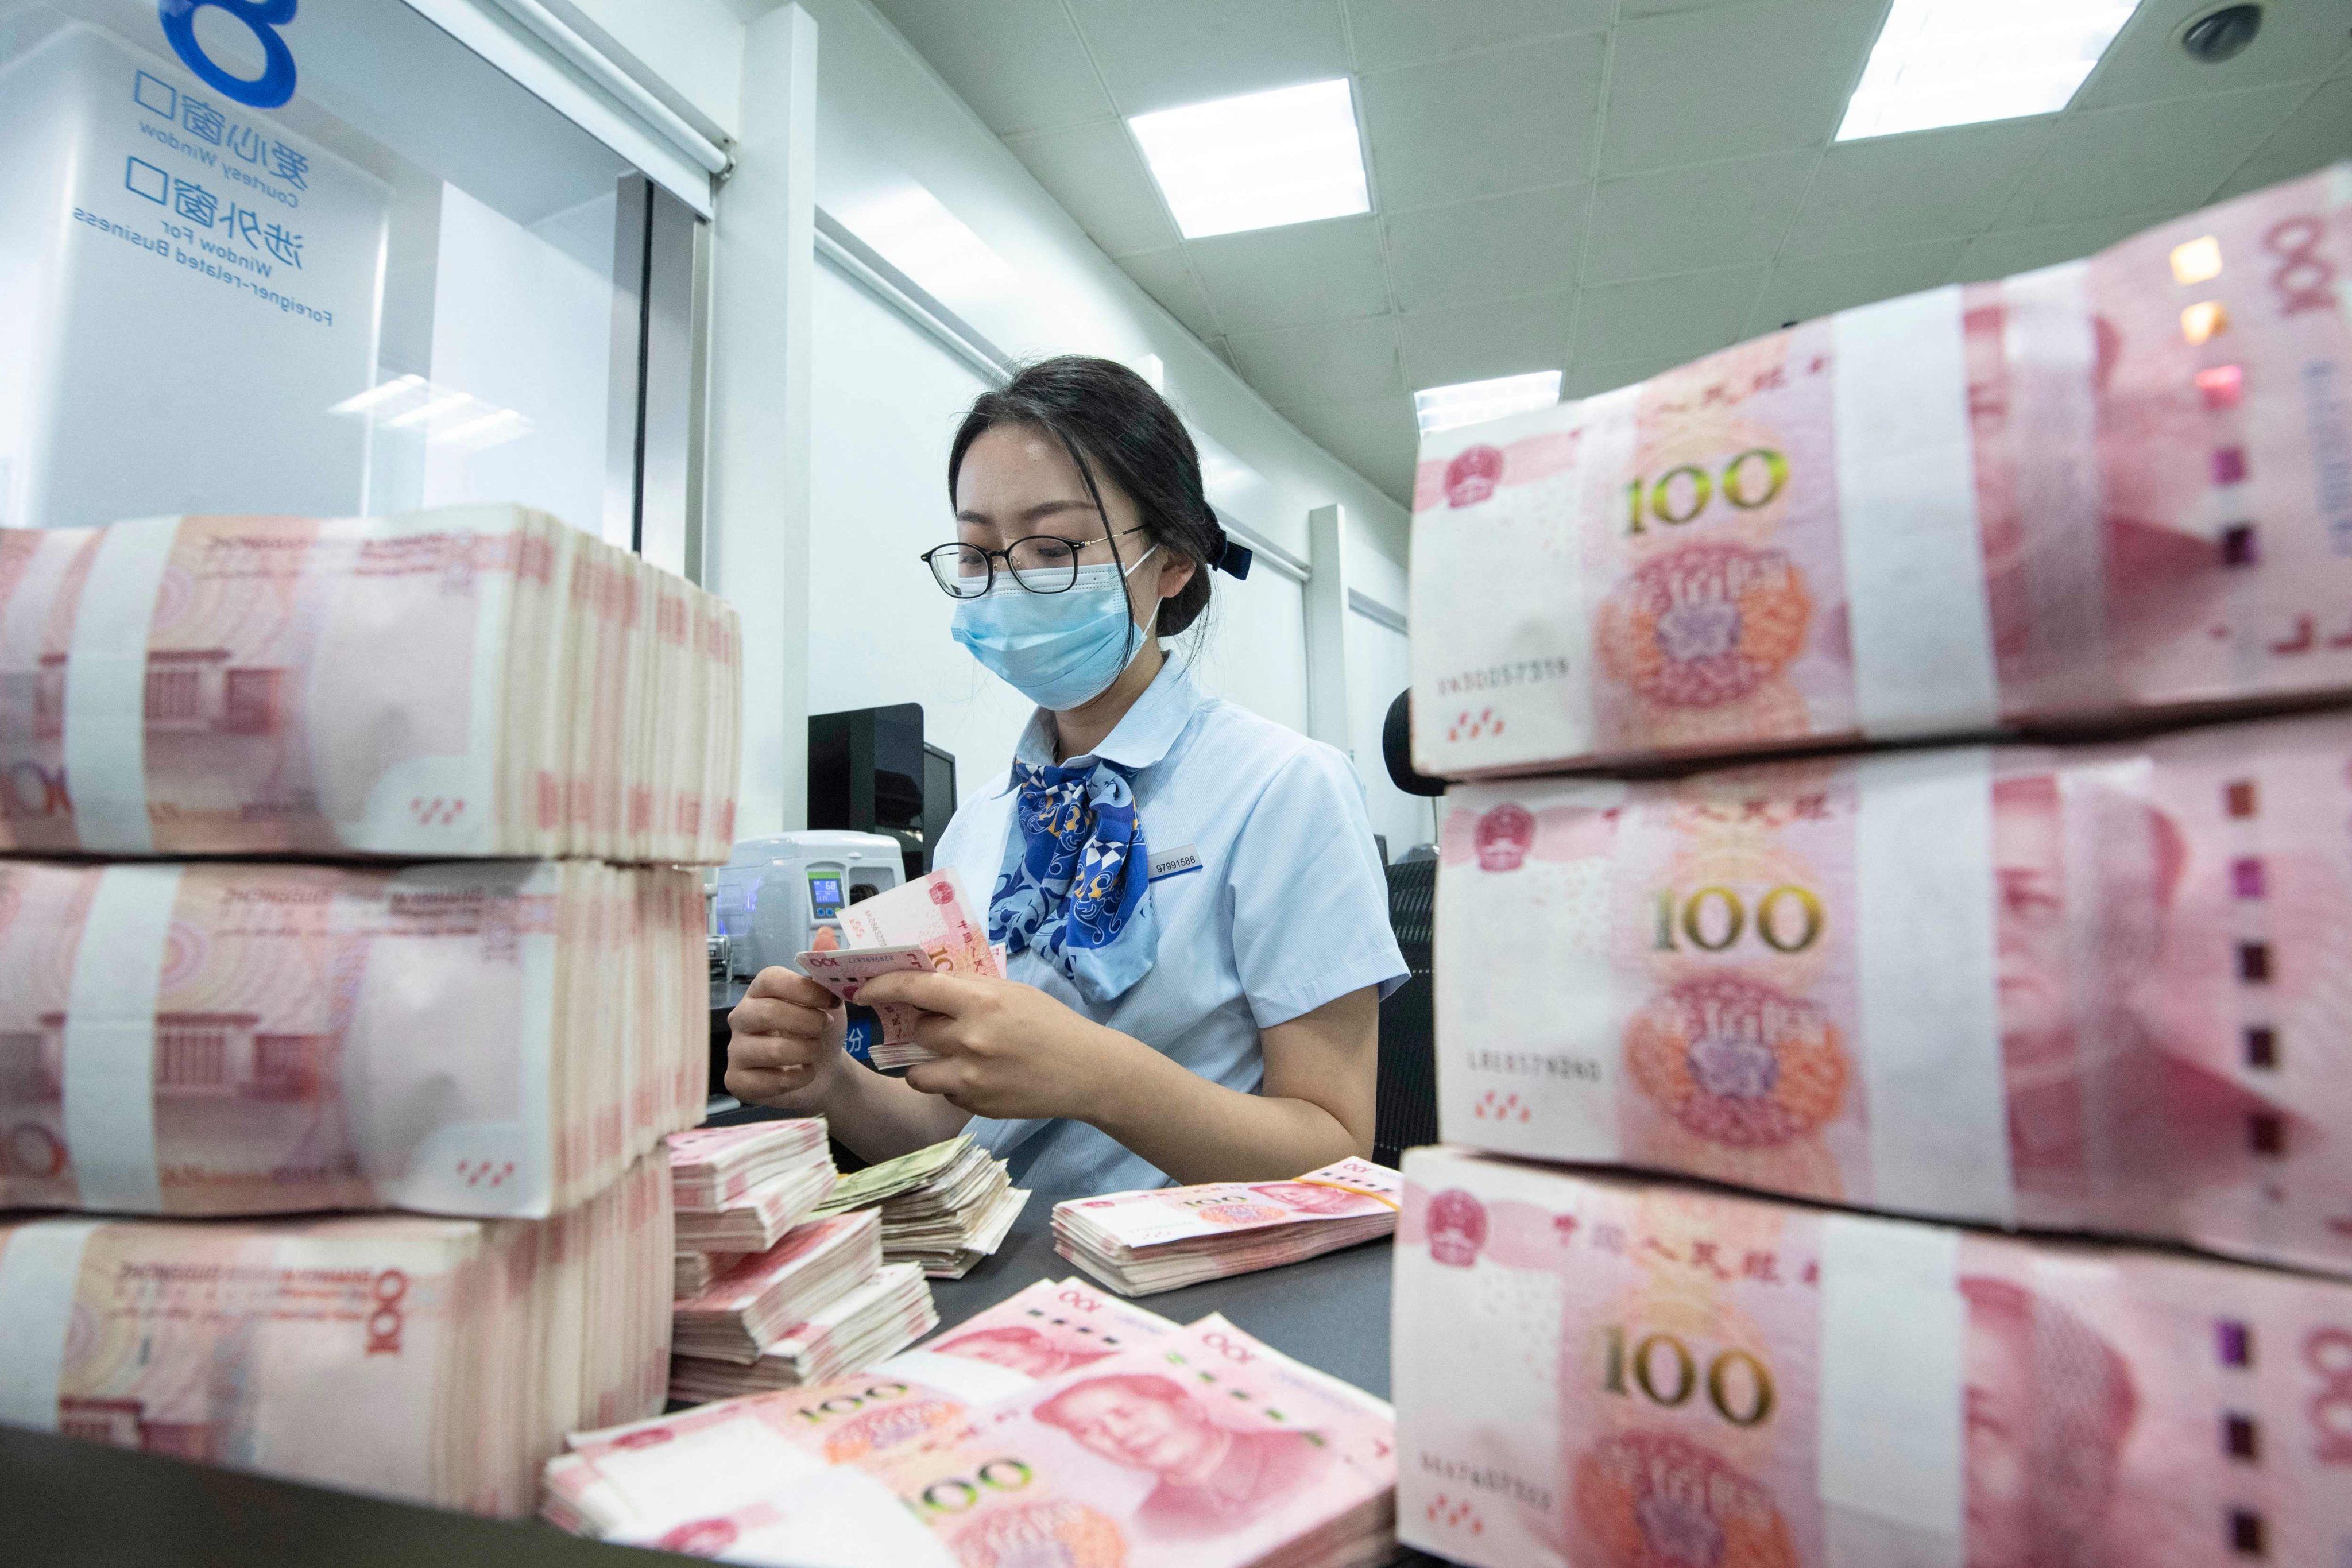 China’s financial system – especially the small regional banks – has been plagued by a prolonged property slump and rising local government debts in the past year. Photo: AFP